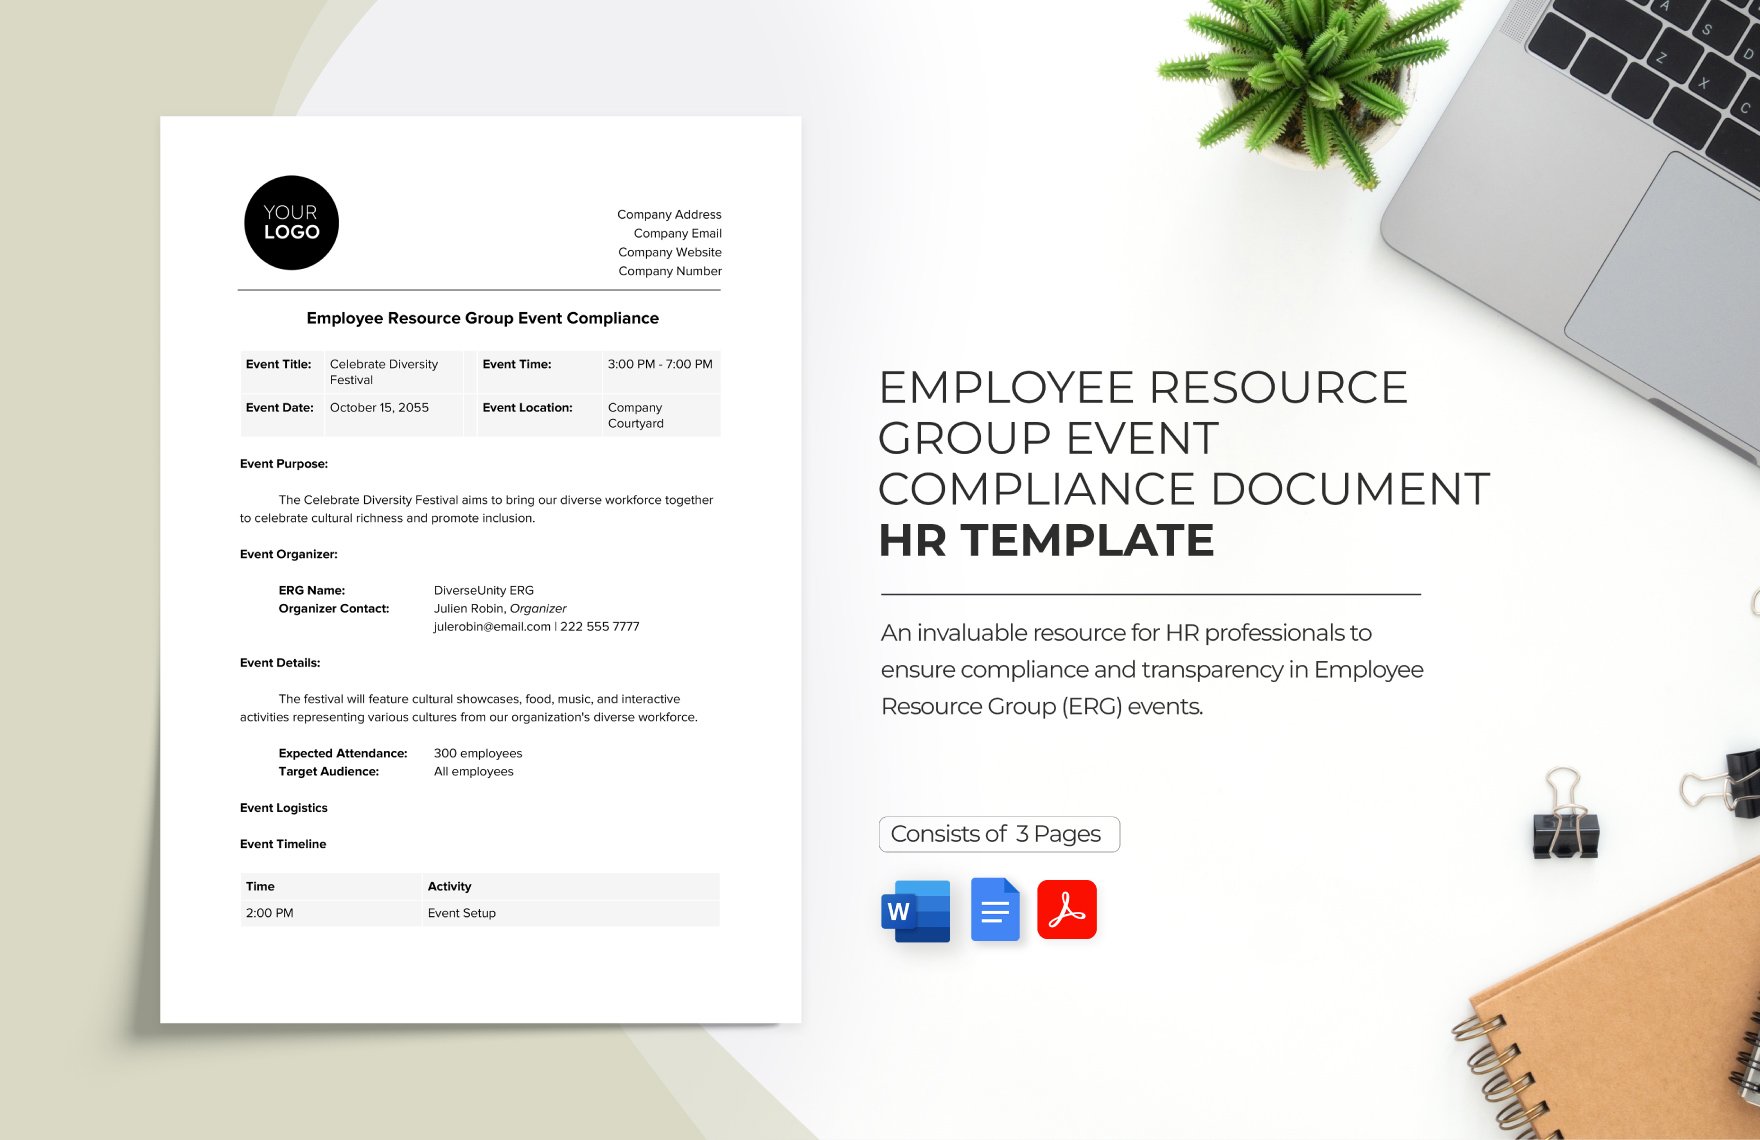 Employee Resource Group Event Compliance Document HR Template in Word, Google Docs, PDF